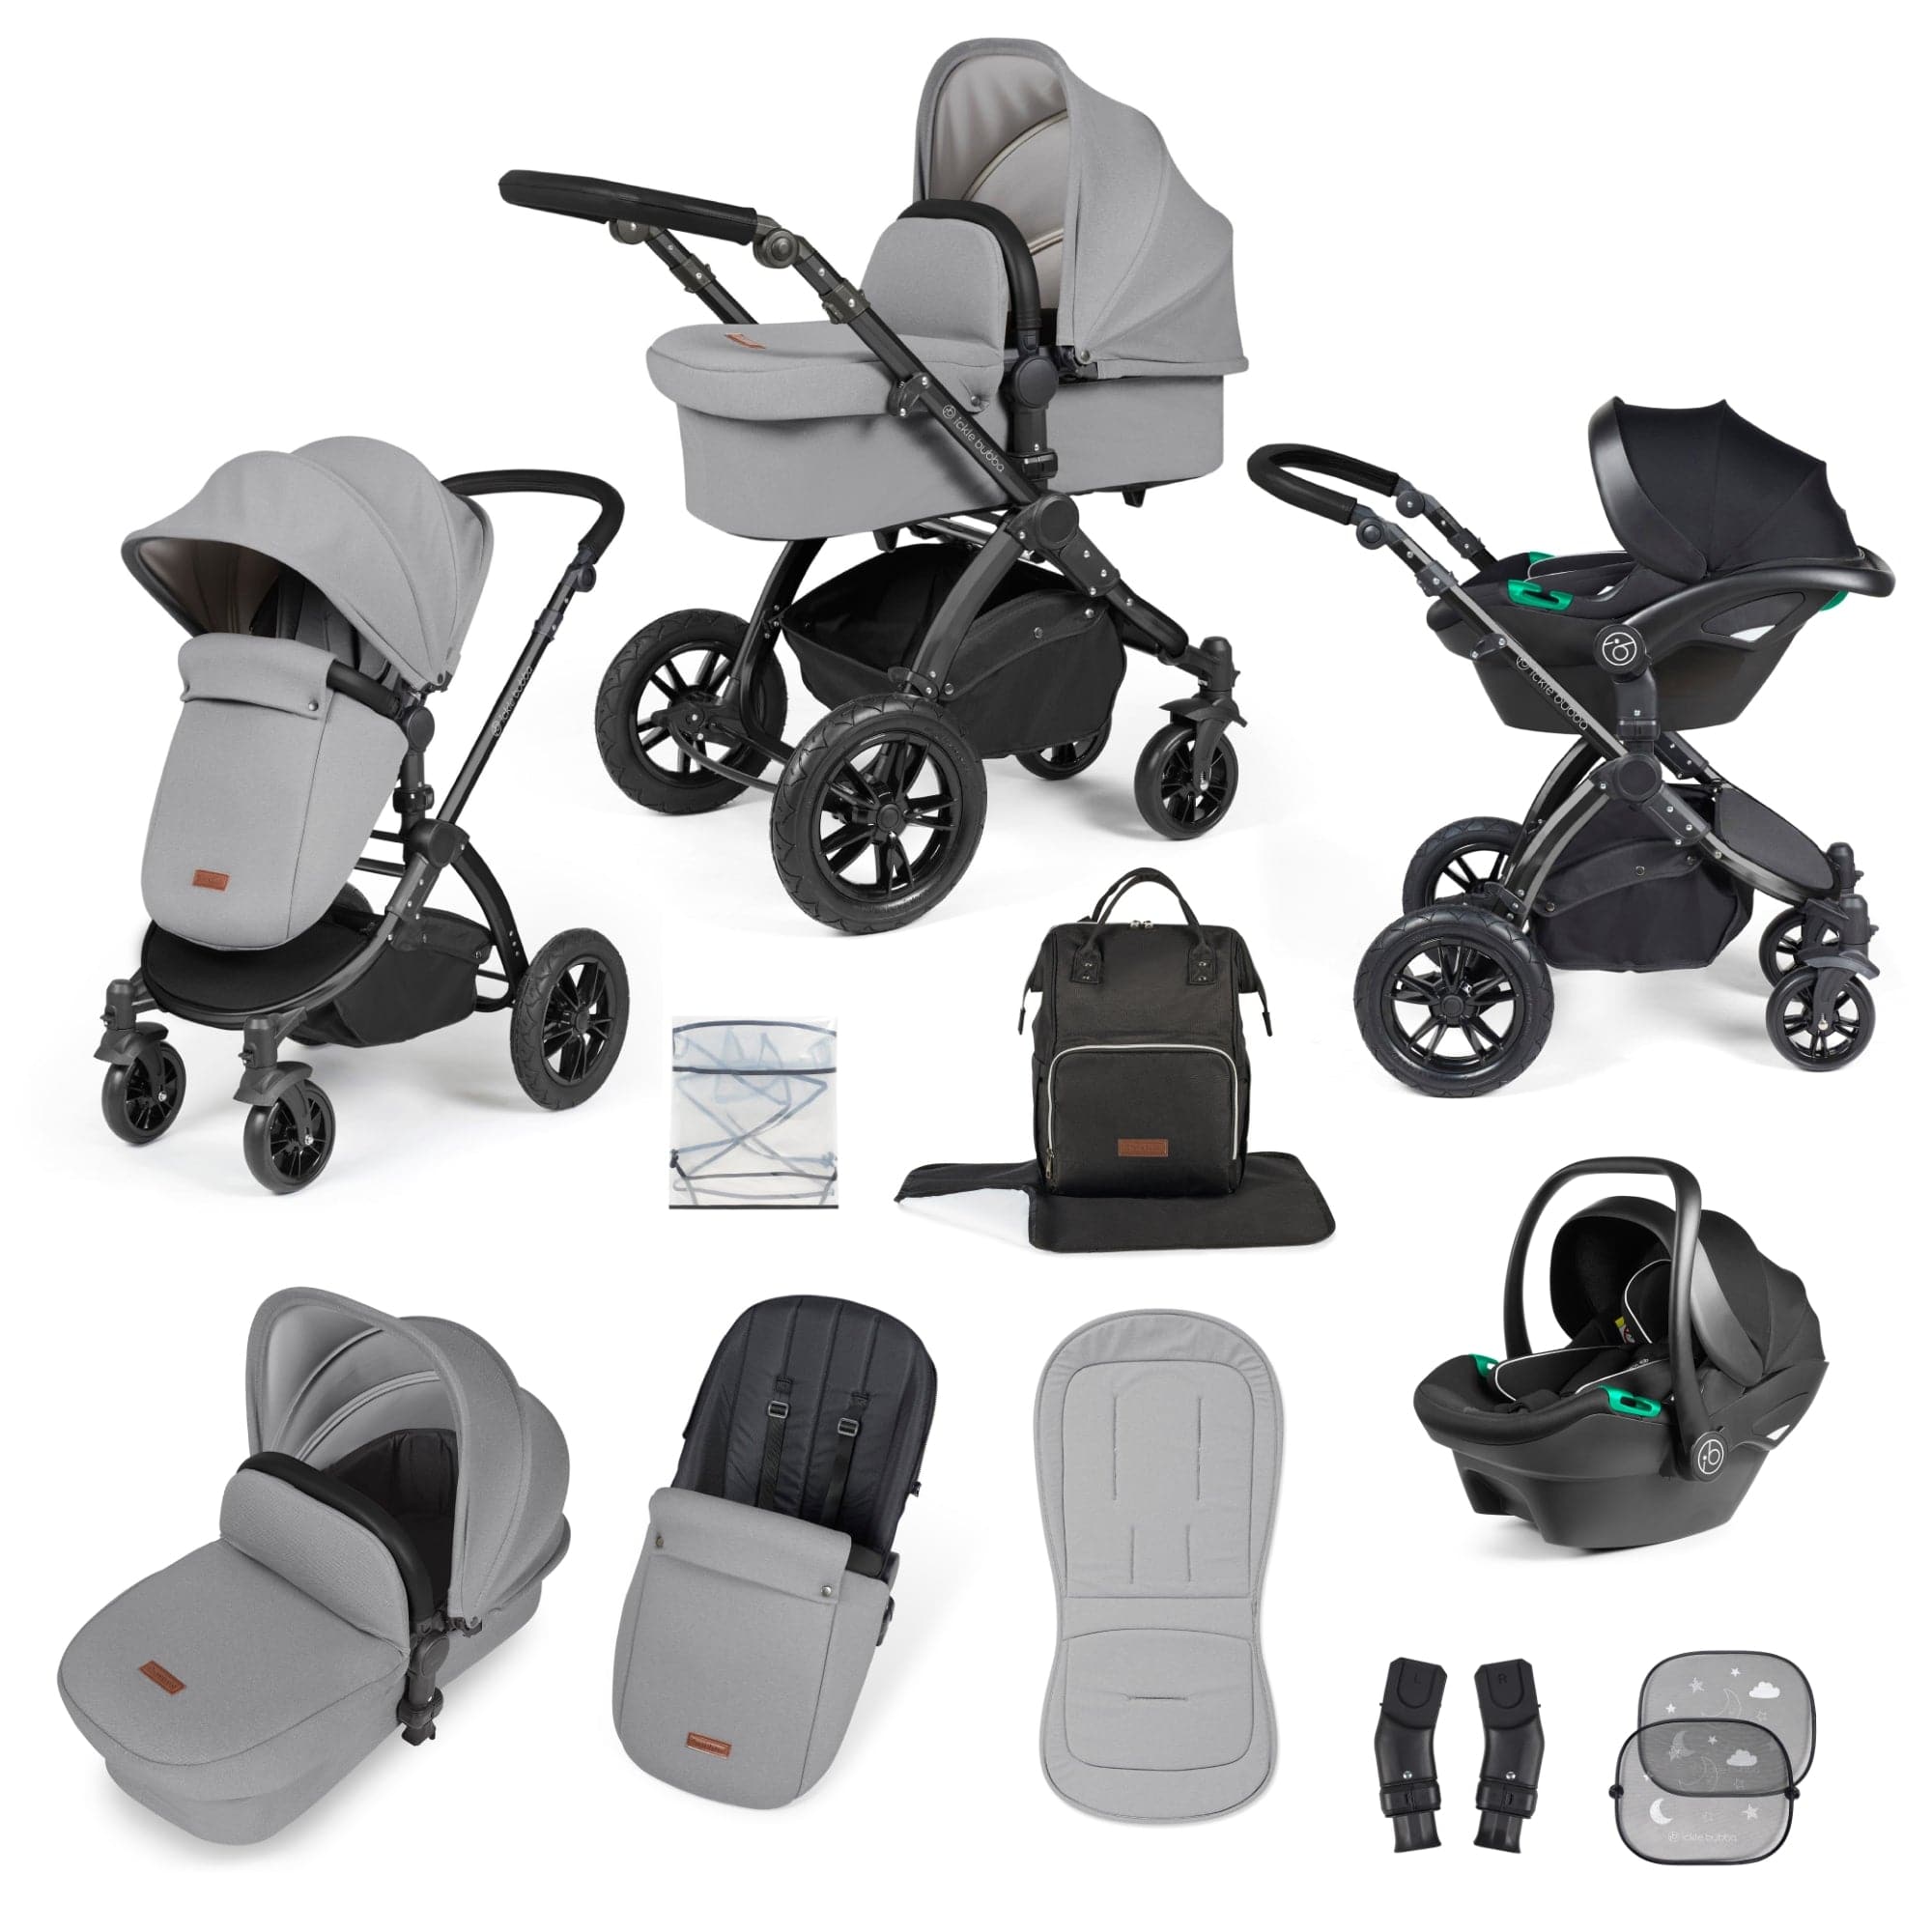 Ickle Bubba Stomp Luxe All-In-One I-Size Travel System With Isofix Base- Black / Pearl Grey / Black - For Your Little One